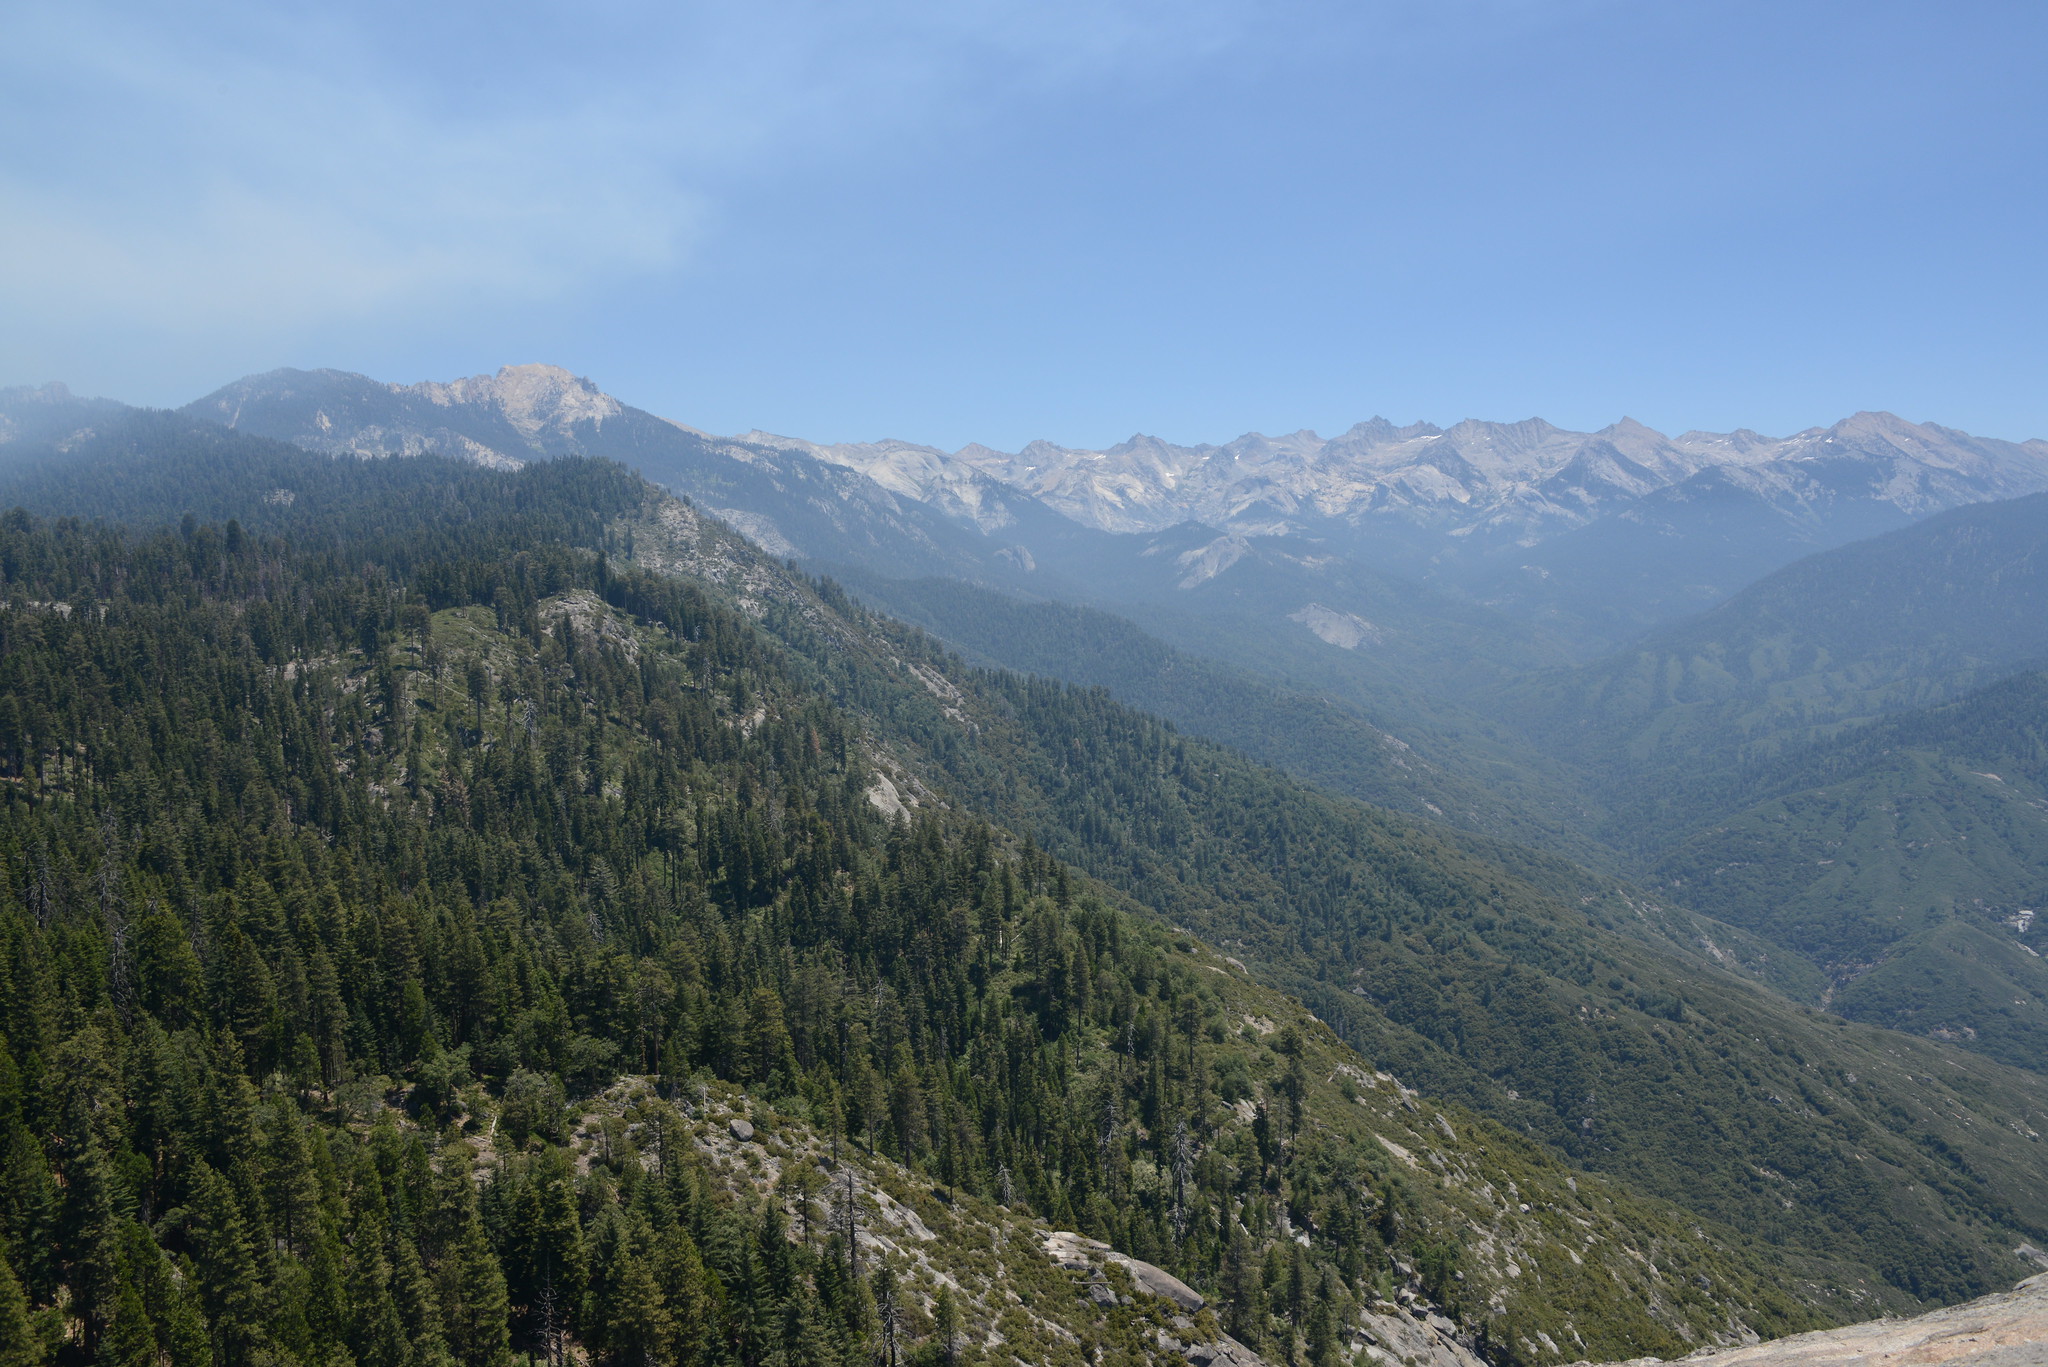 Another view from the top of Moro Rock